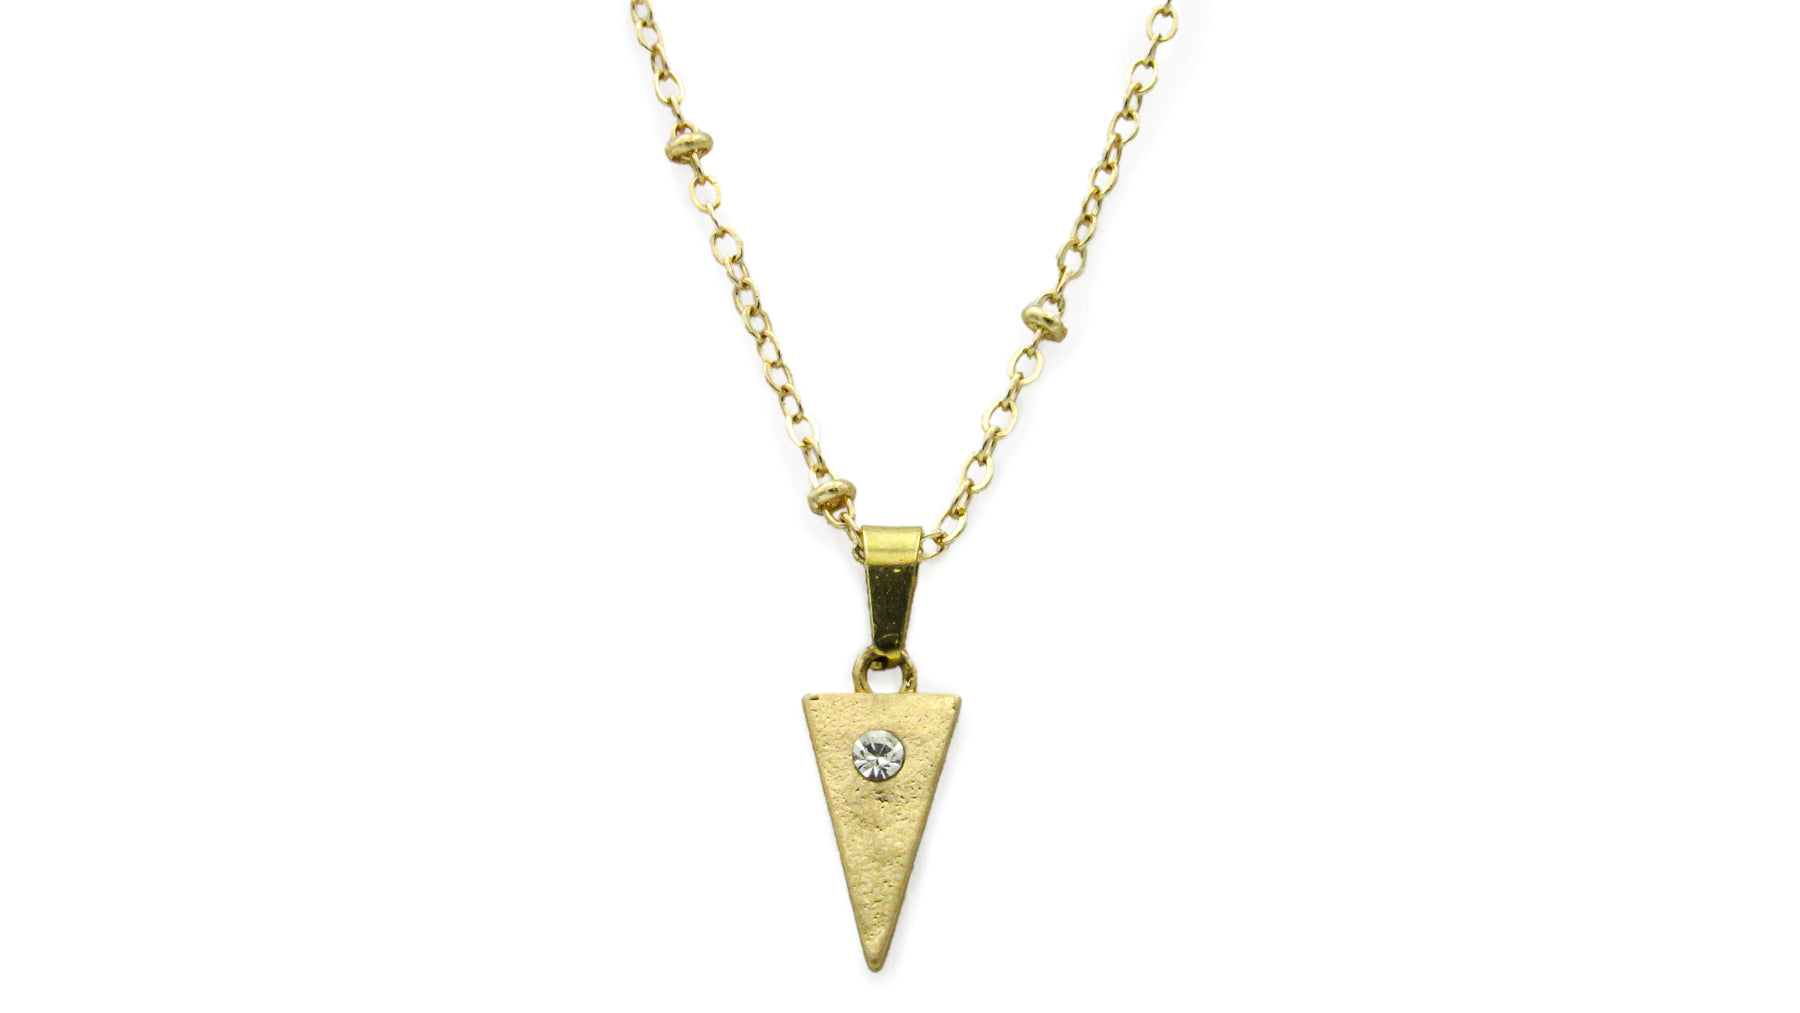 Dainty Triangle Gold Pendant Necklace With CZ Pave •  Necklaces • Oh, Heart!